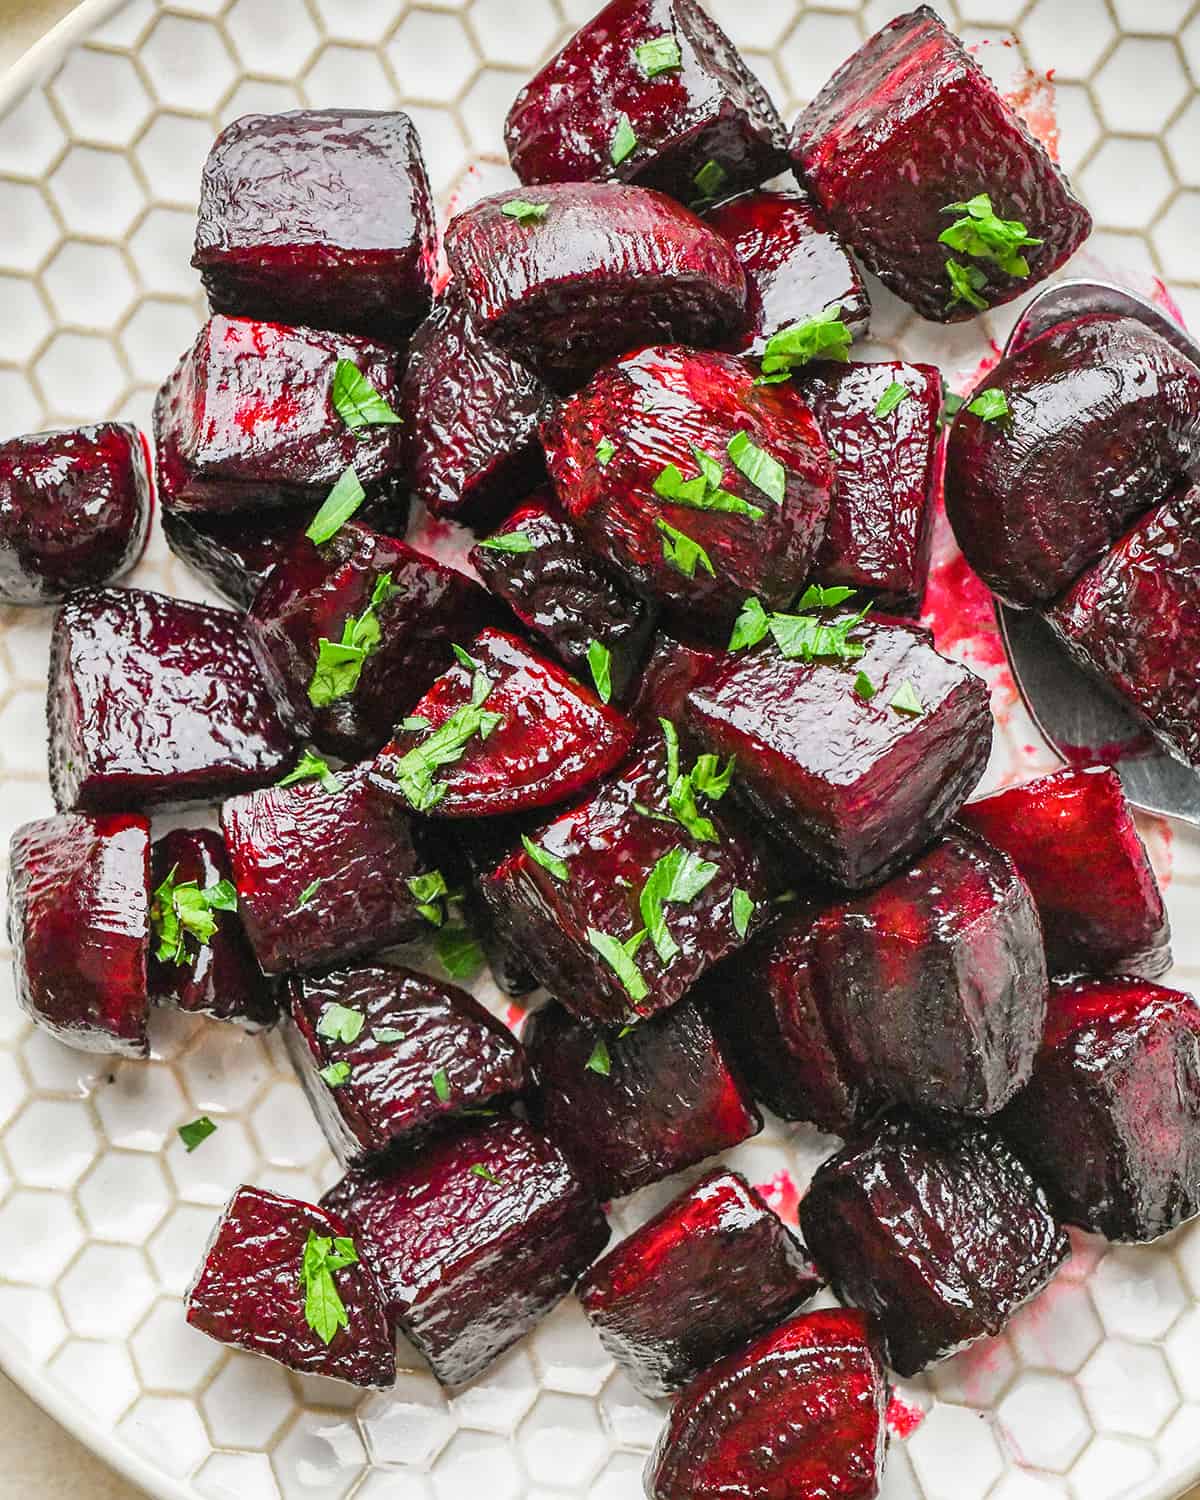 Oven Roasted Beets on a plate garnished with greens